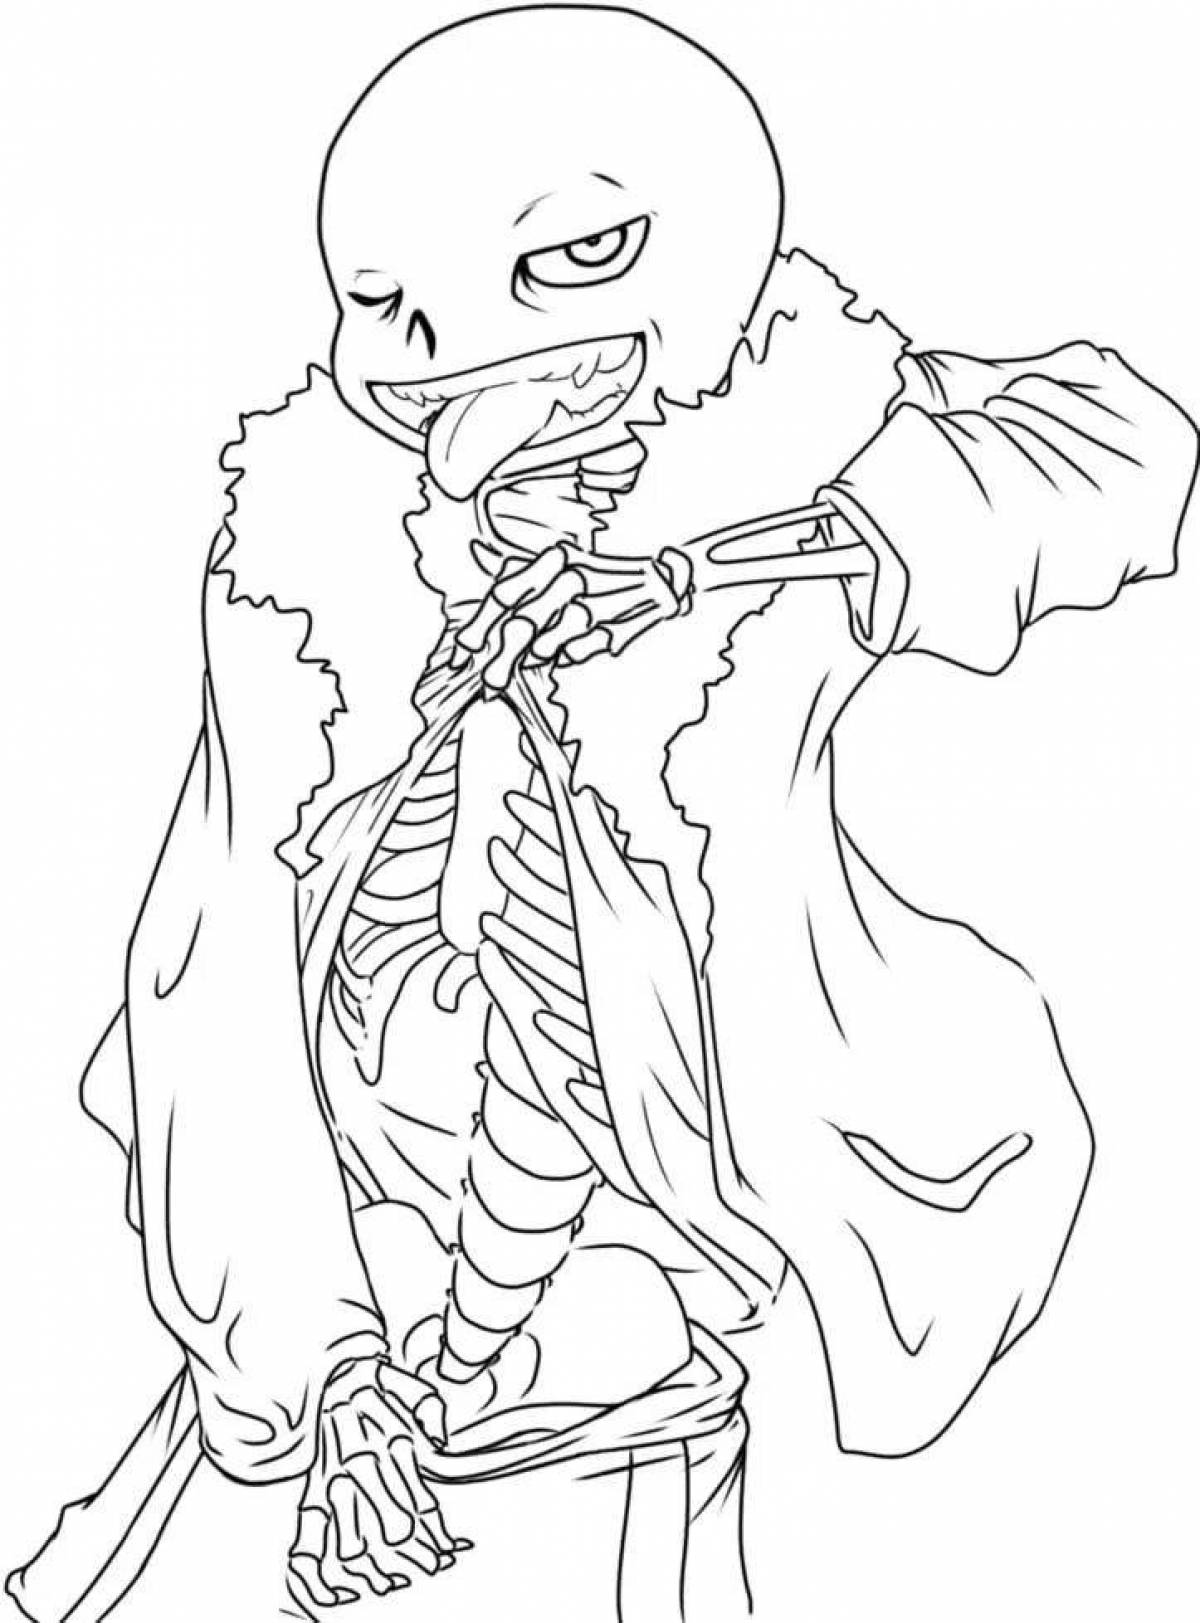 Animated error sans coloring page